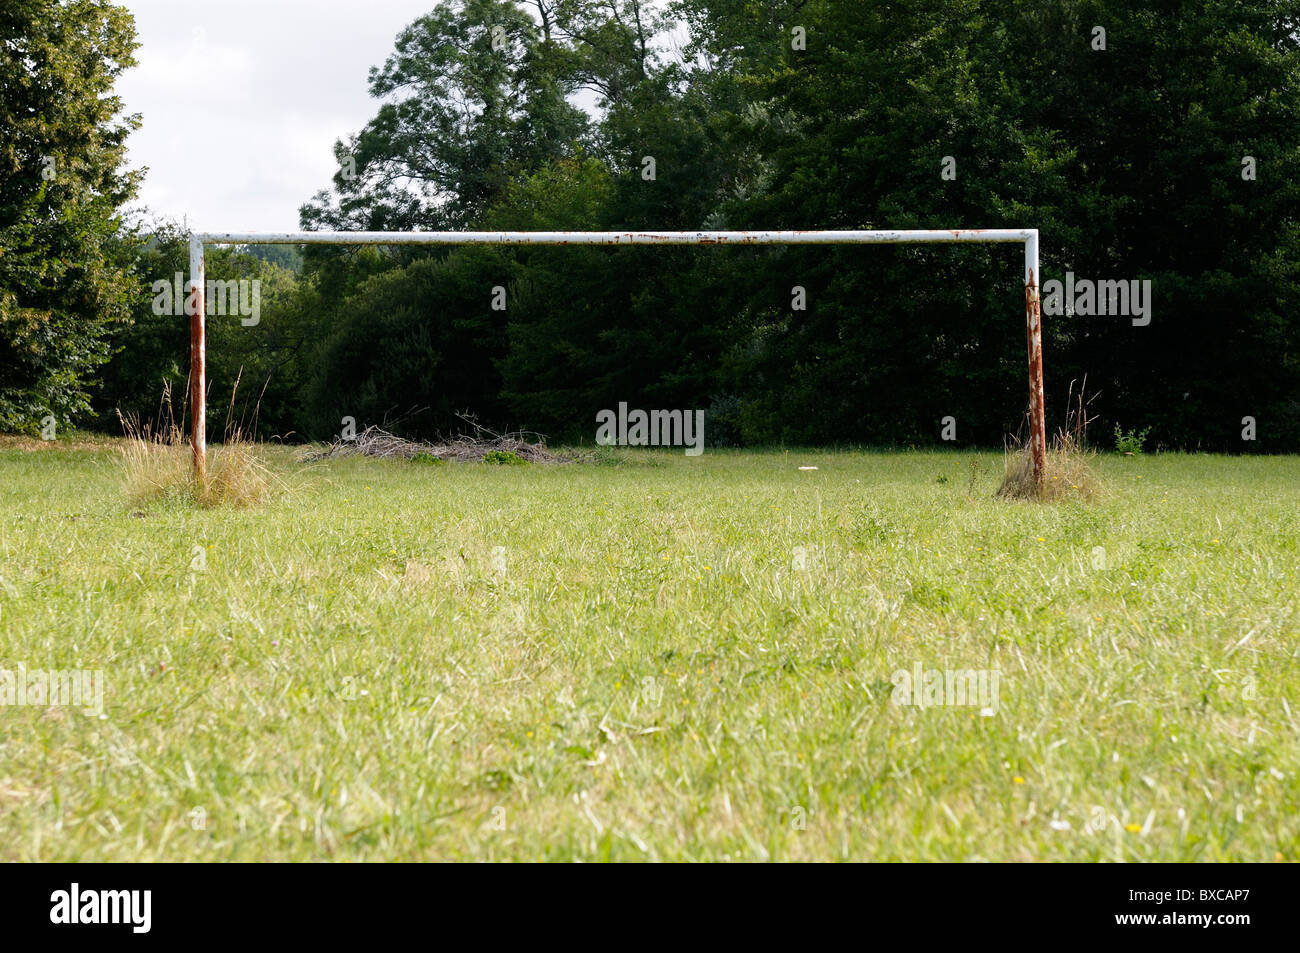 Stock photo of an old rusting goalpost. Stock Photo